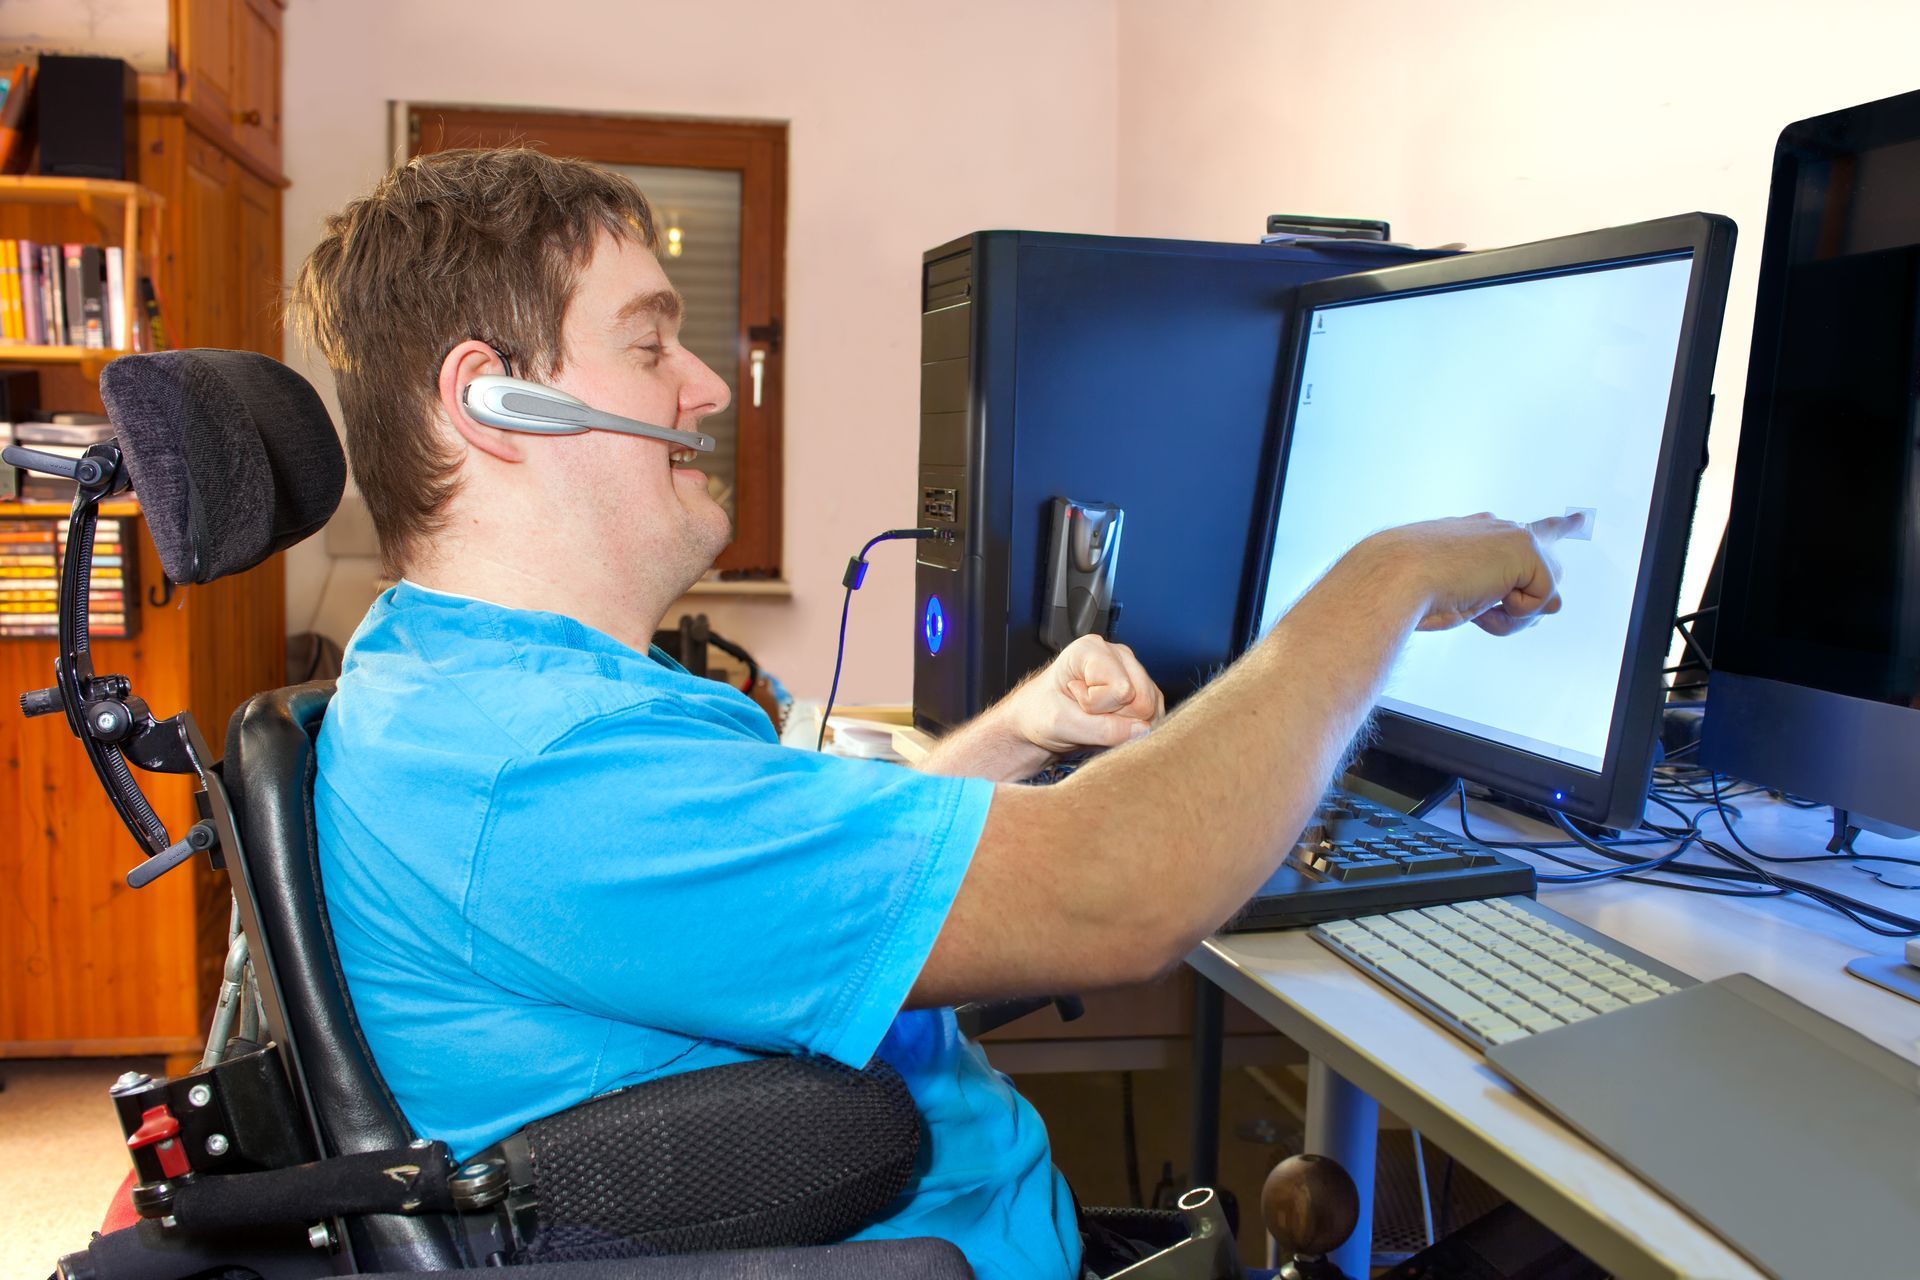 Man with Cerebral Palsy communicating using a headset and pointing at a computer screen